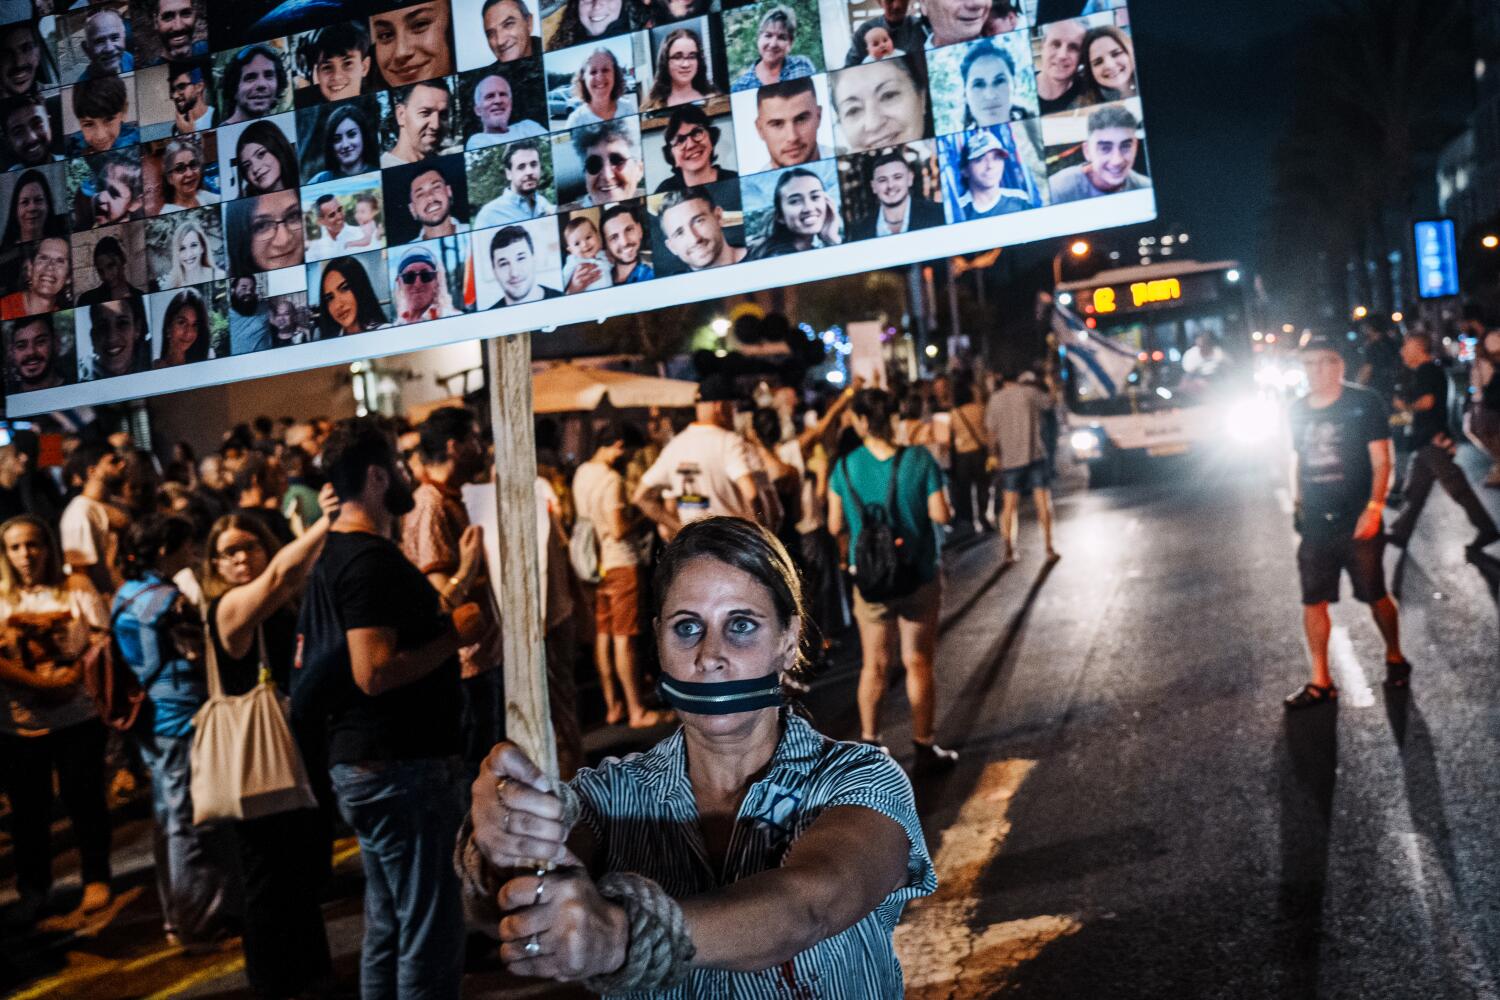 A young Israeli festivalgoer's death is confirmed, shining light on families' long ordeal